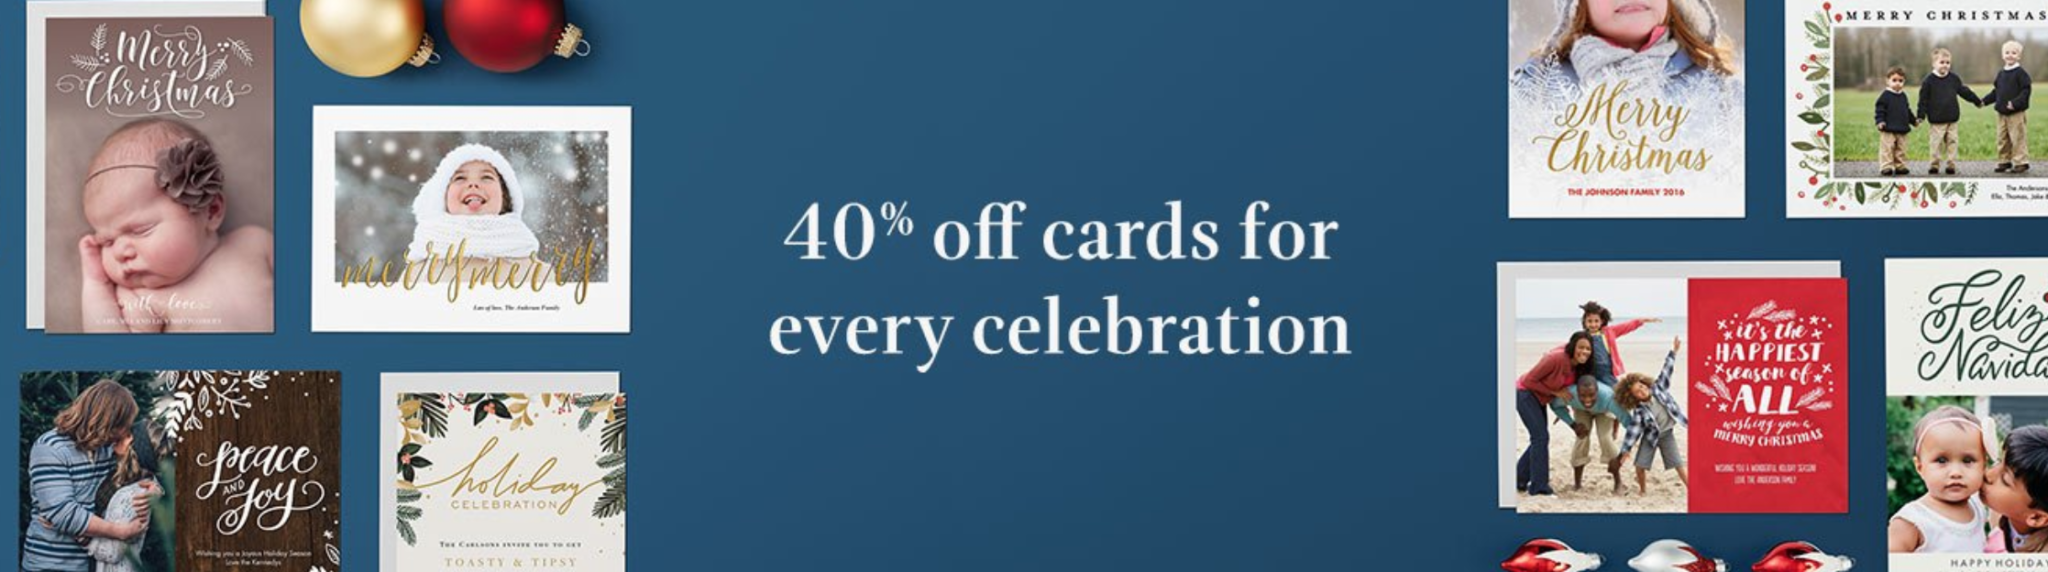 Amazon Prints: Order Now and Get 40% Your Holiday Cards!